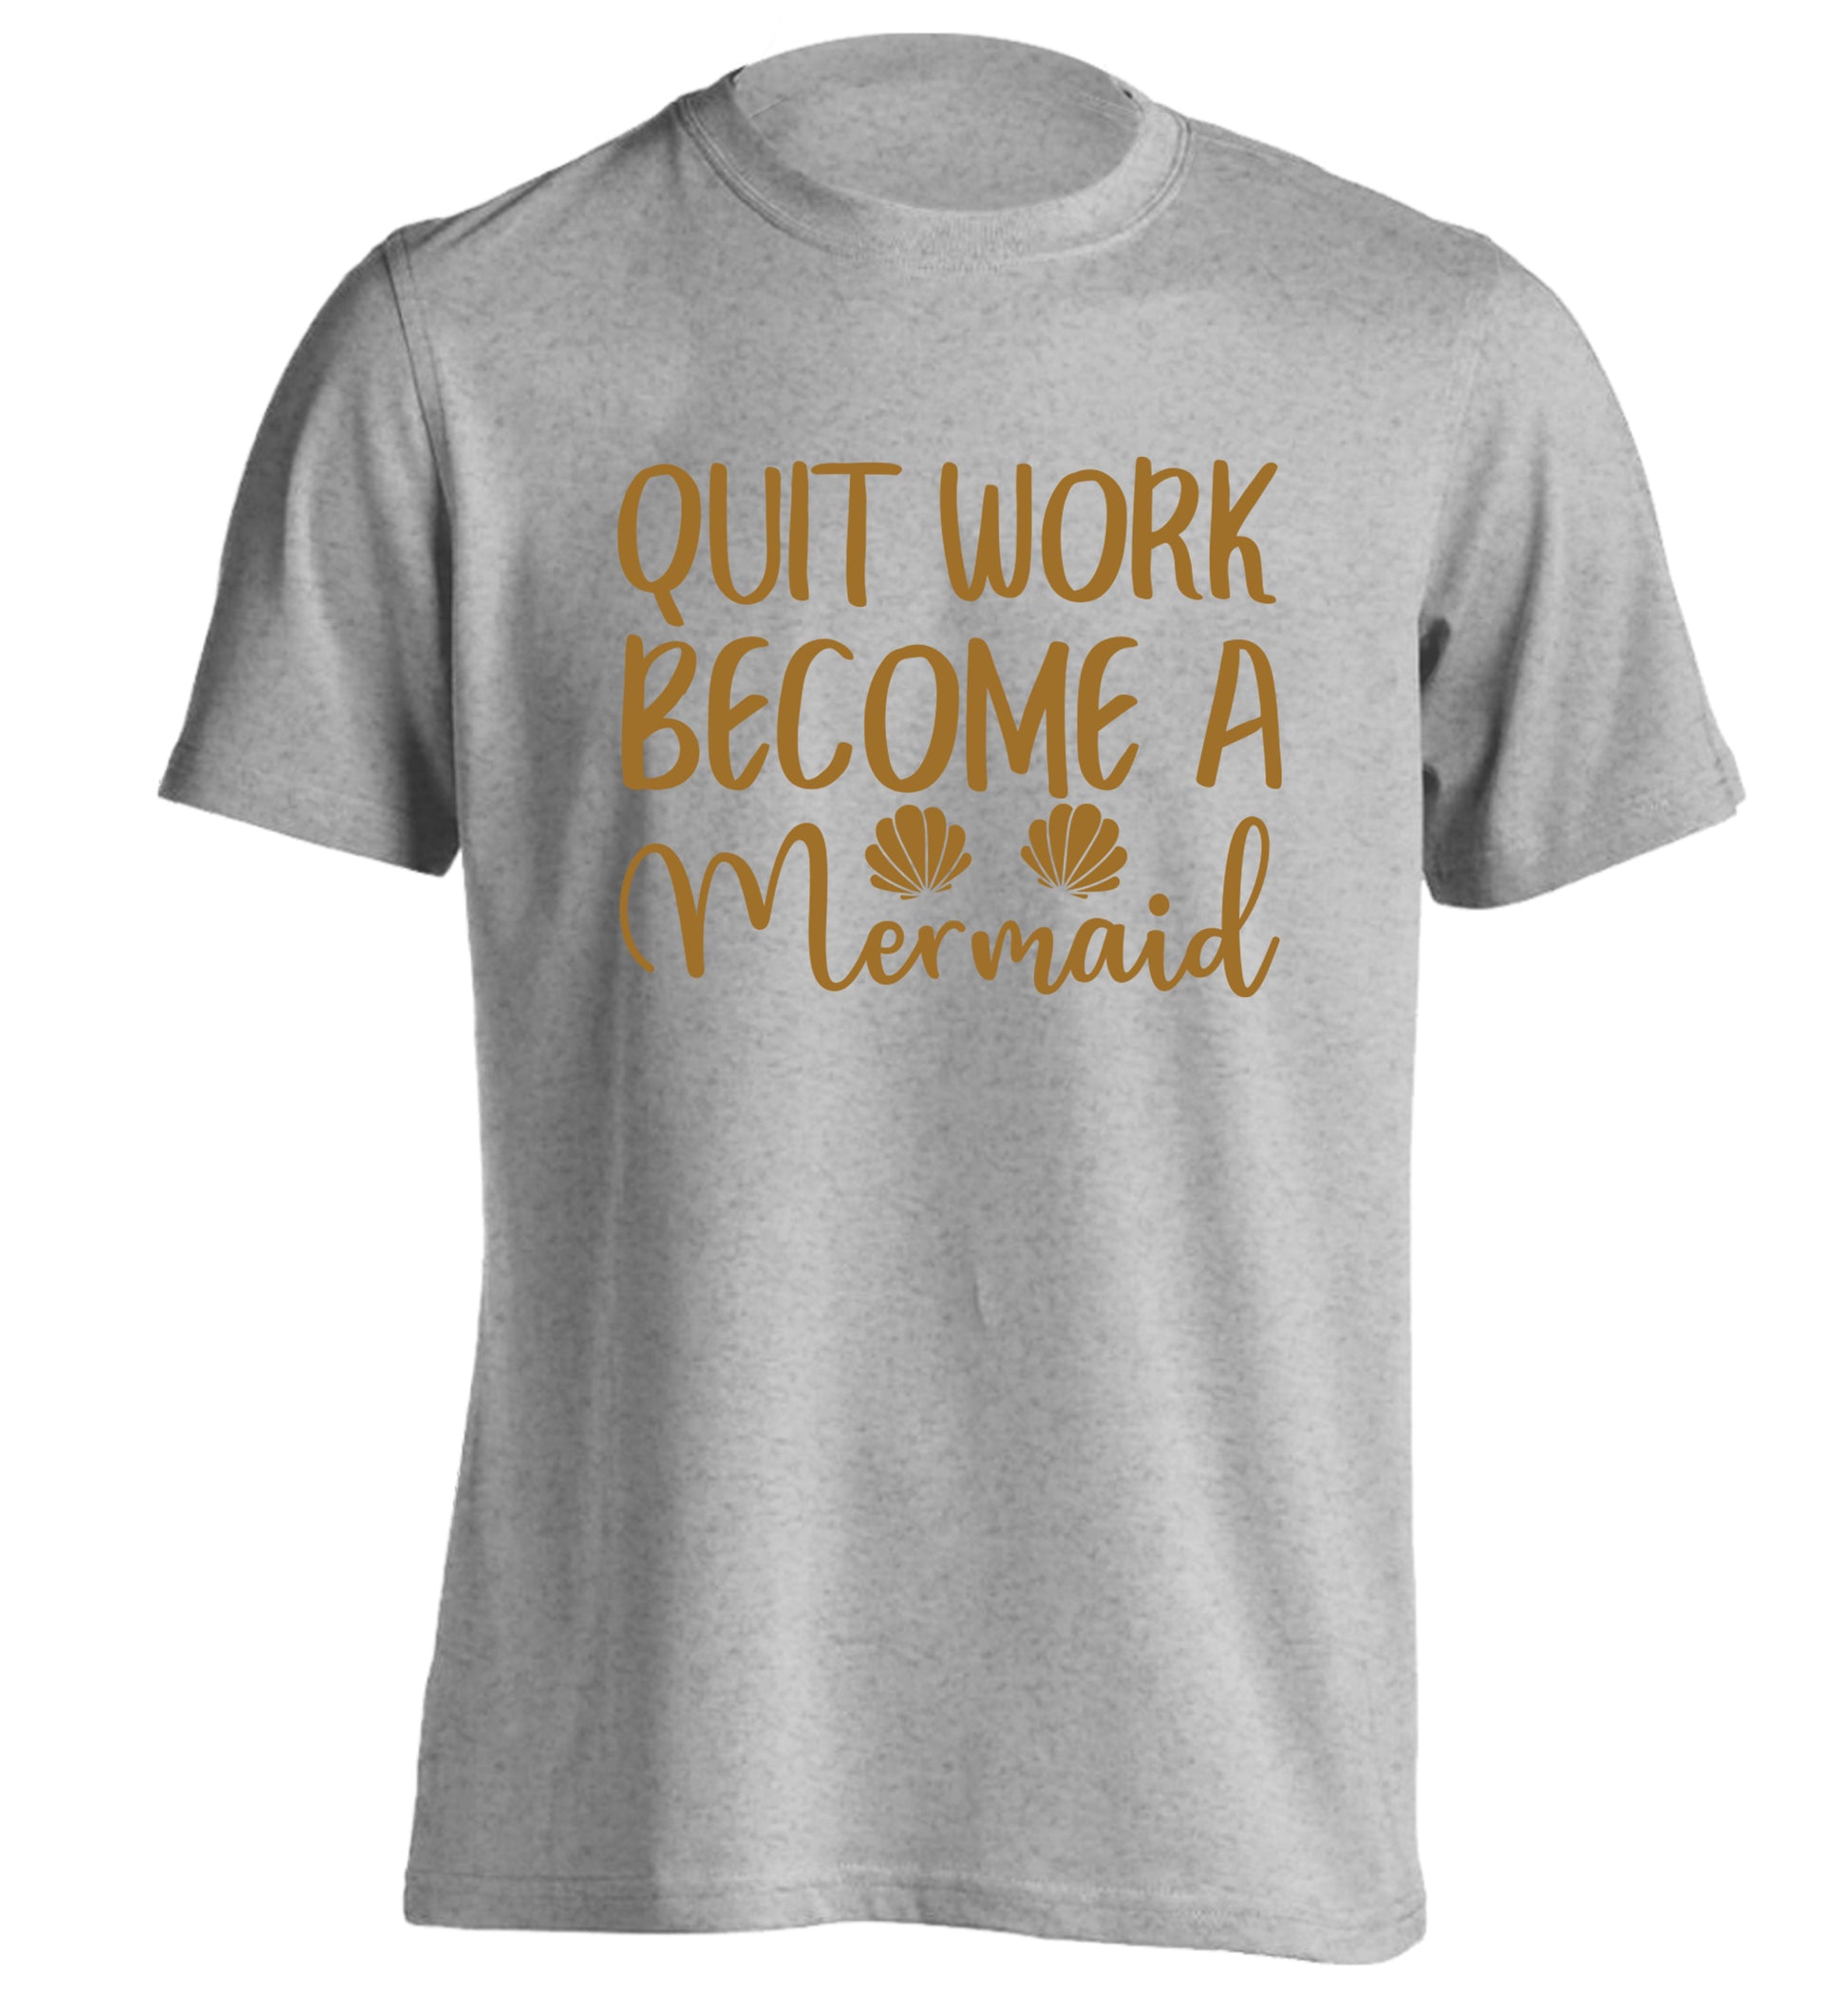 Quit work become a mermaid adults unisex grey Tshirt 2XL